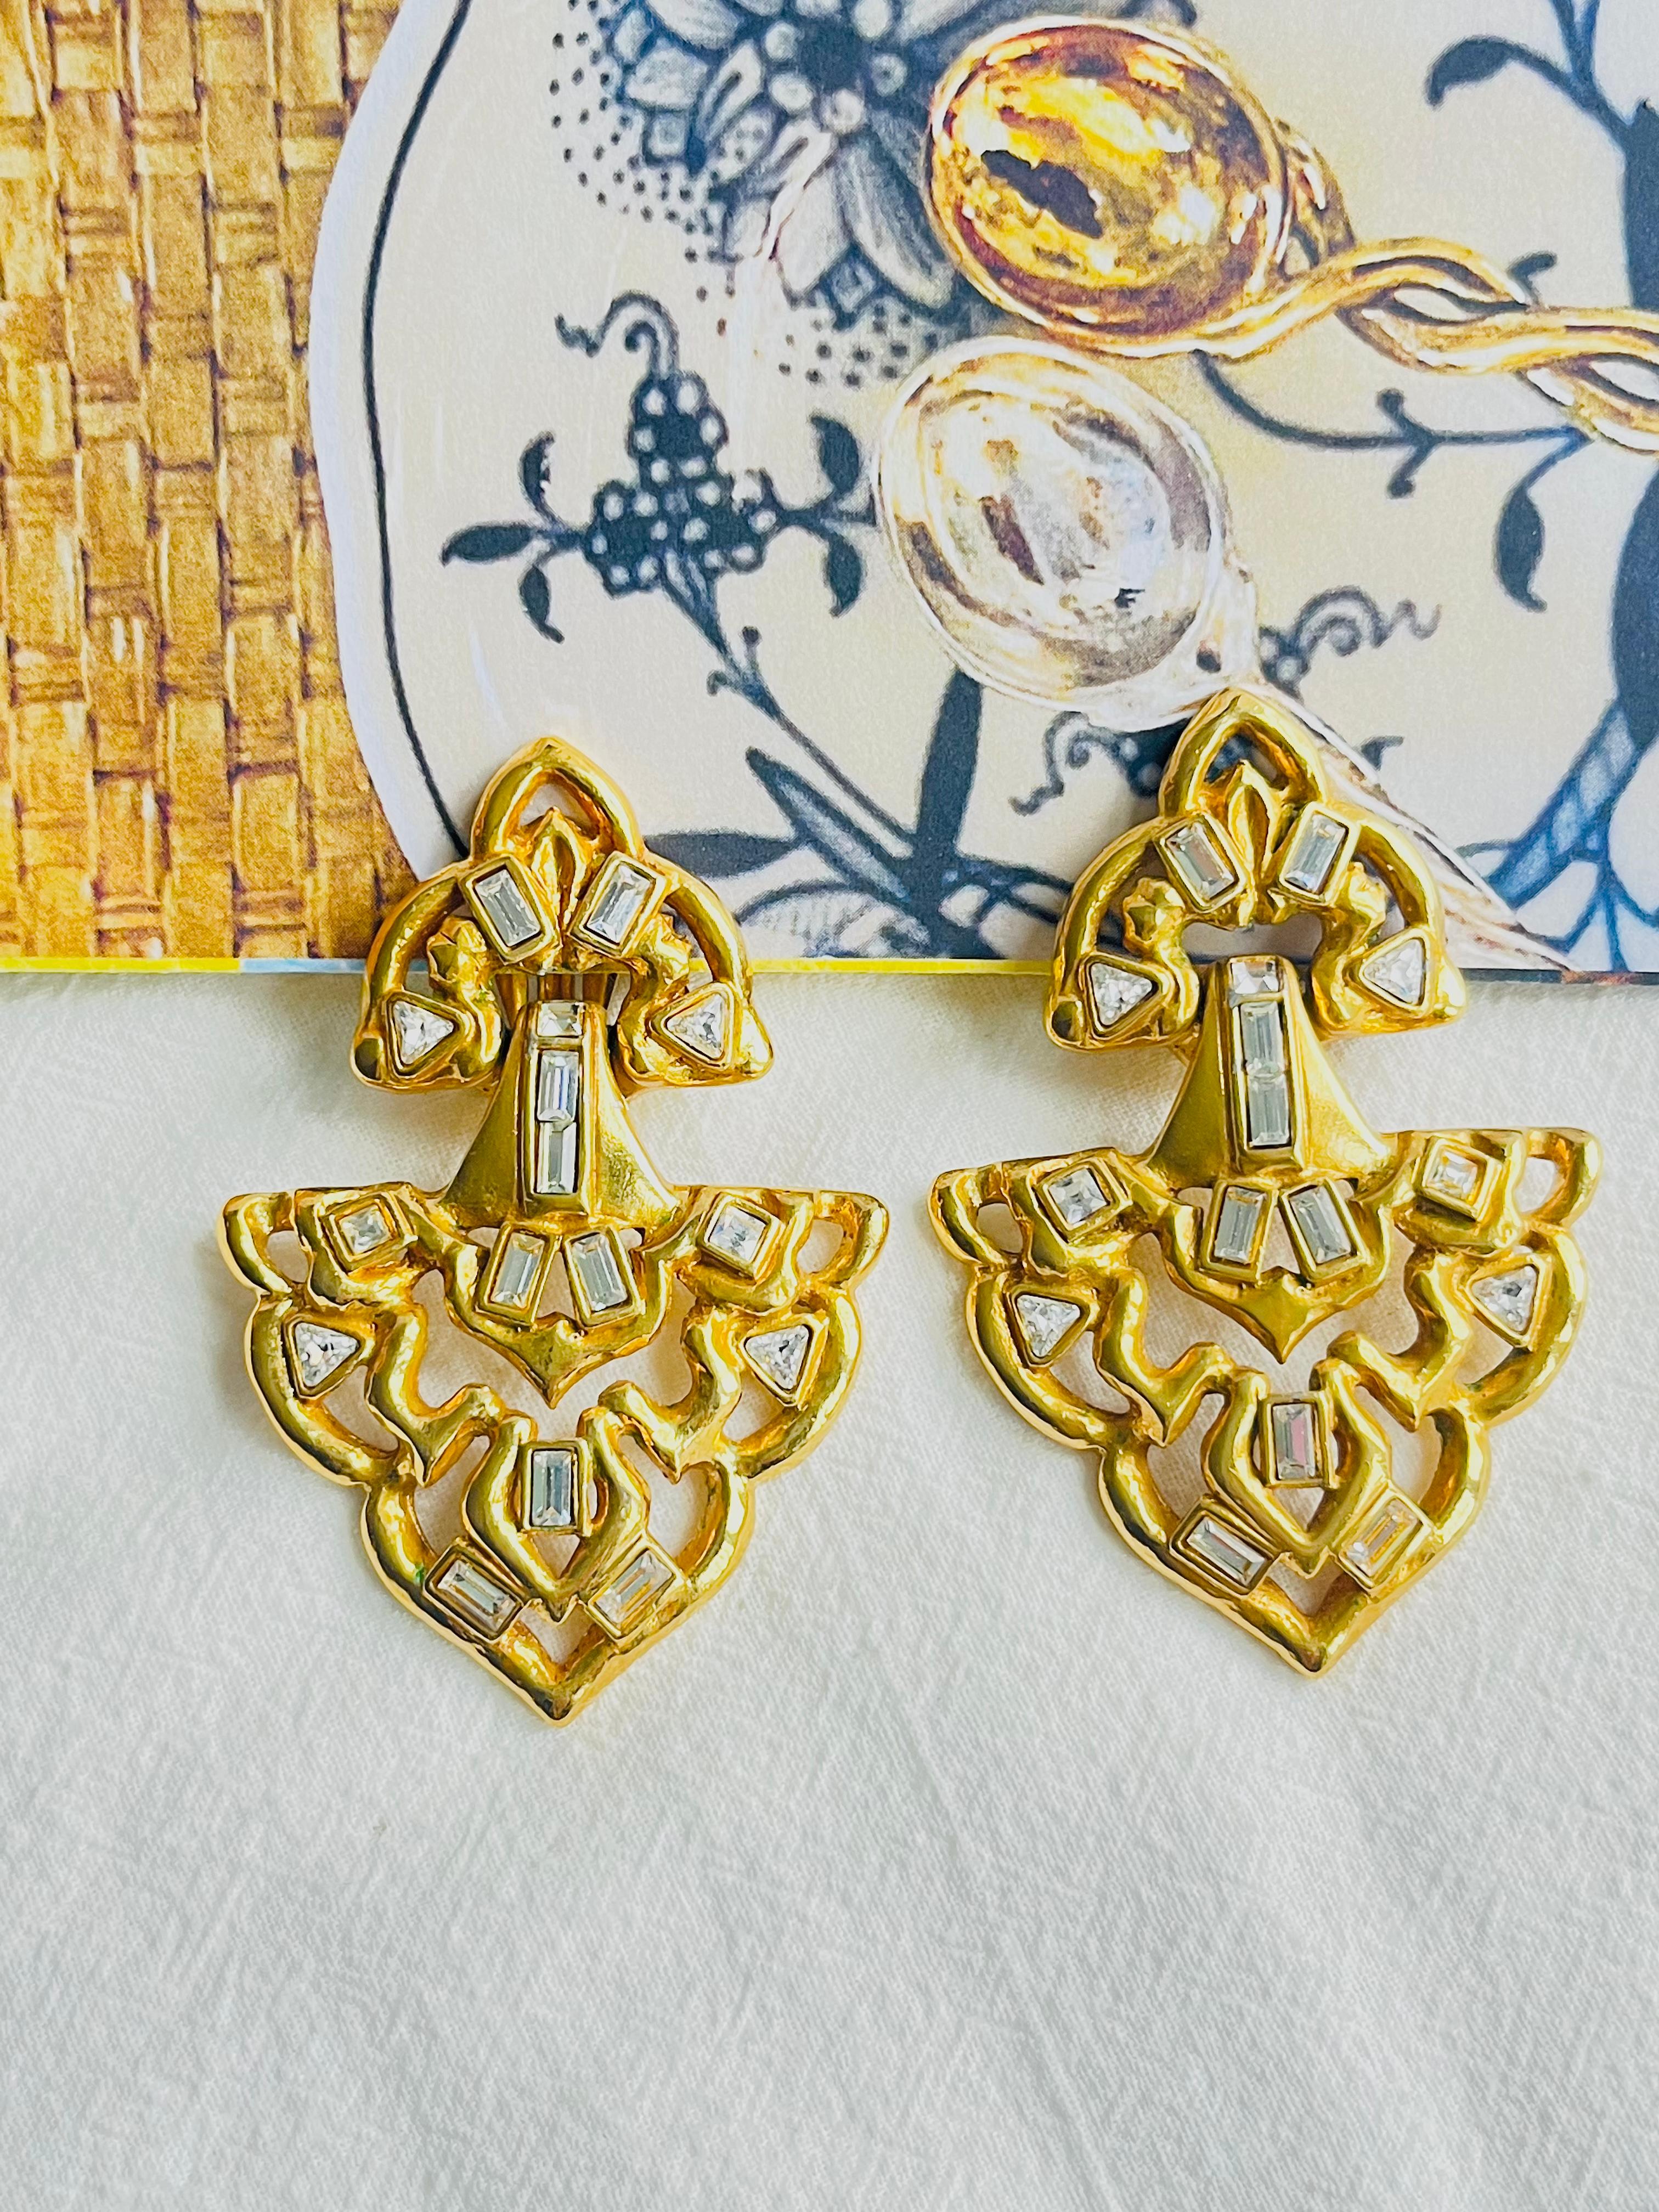 Yves Saint Laurent YSL Vintage Massive Door Knocker Crystals Openwork Chunky Exquisite Drop Clip Earrings, Gold Tone

Vintage and very rare to find. 100% Genuine. Signed at the rear.

Very good condition. Come with original box and